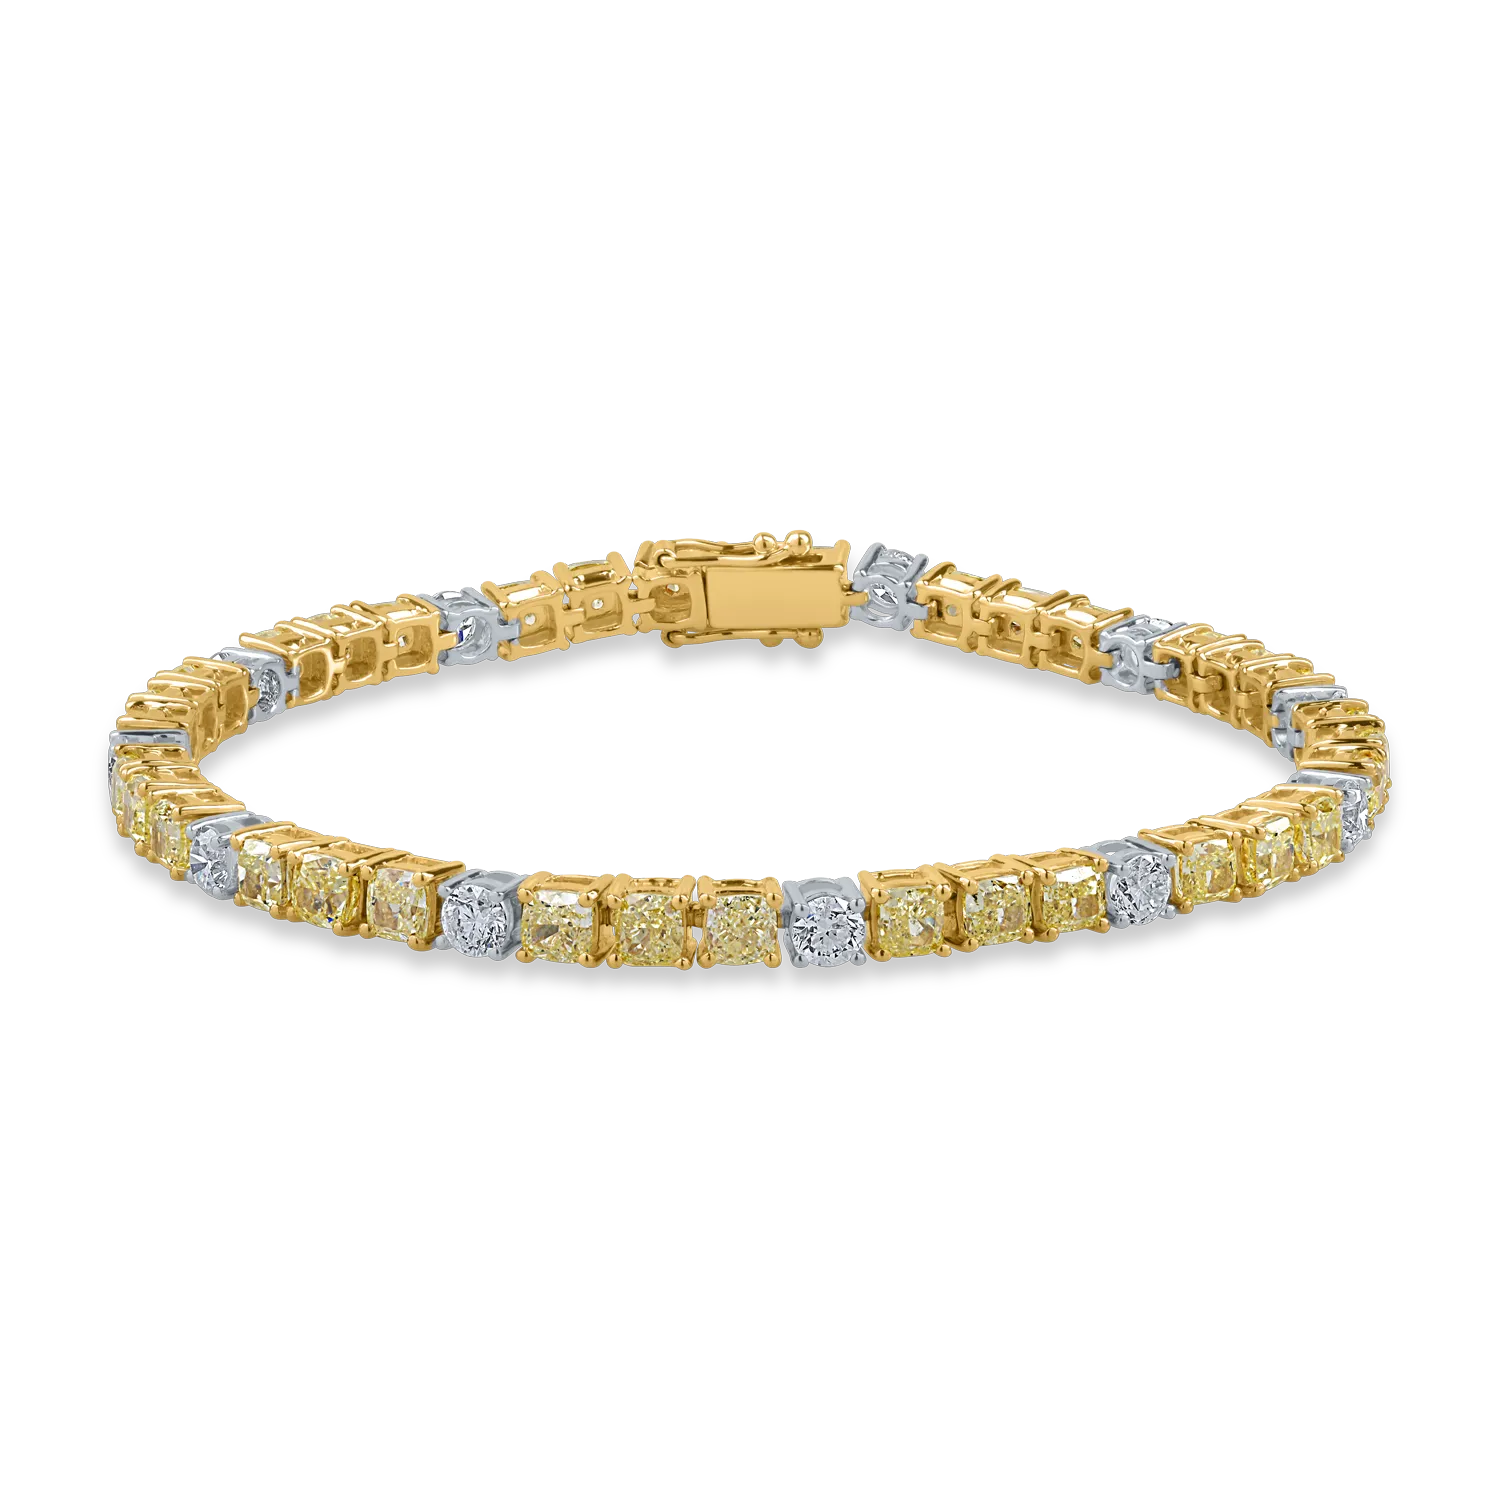 White-yellow gold tennis bracelet with 8.59ct yellow diamonds and 1.91ct clear diamonds